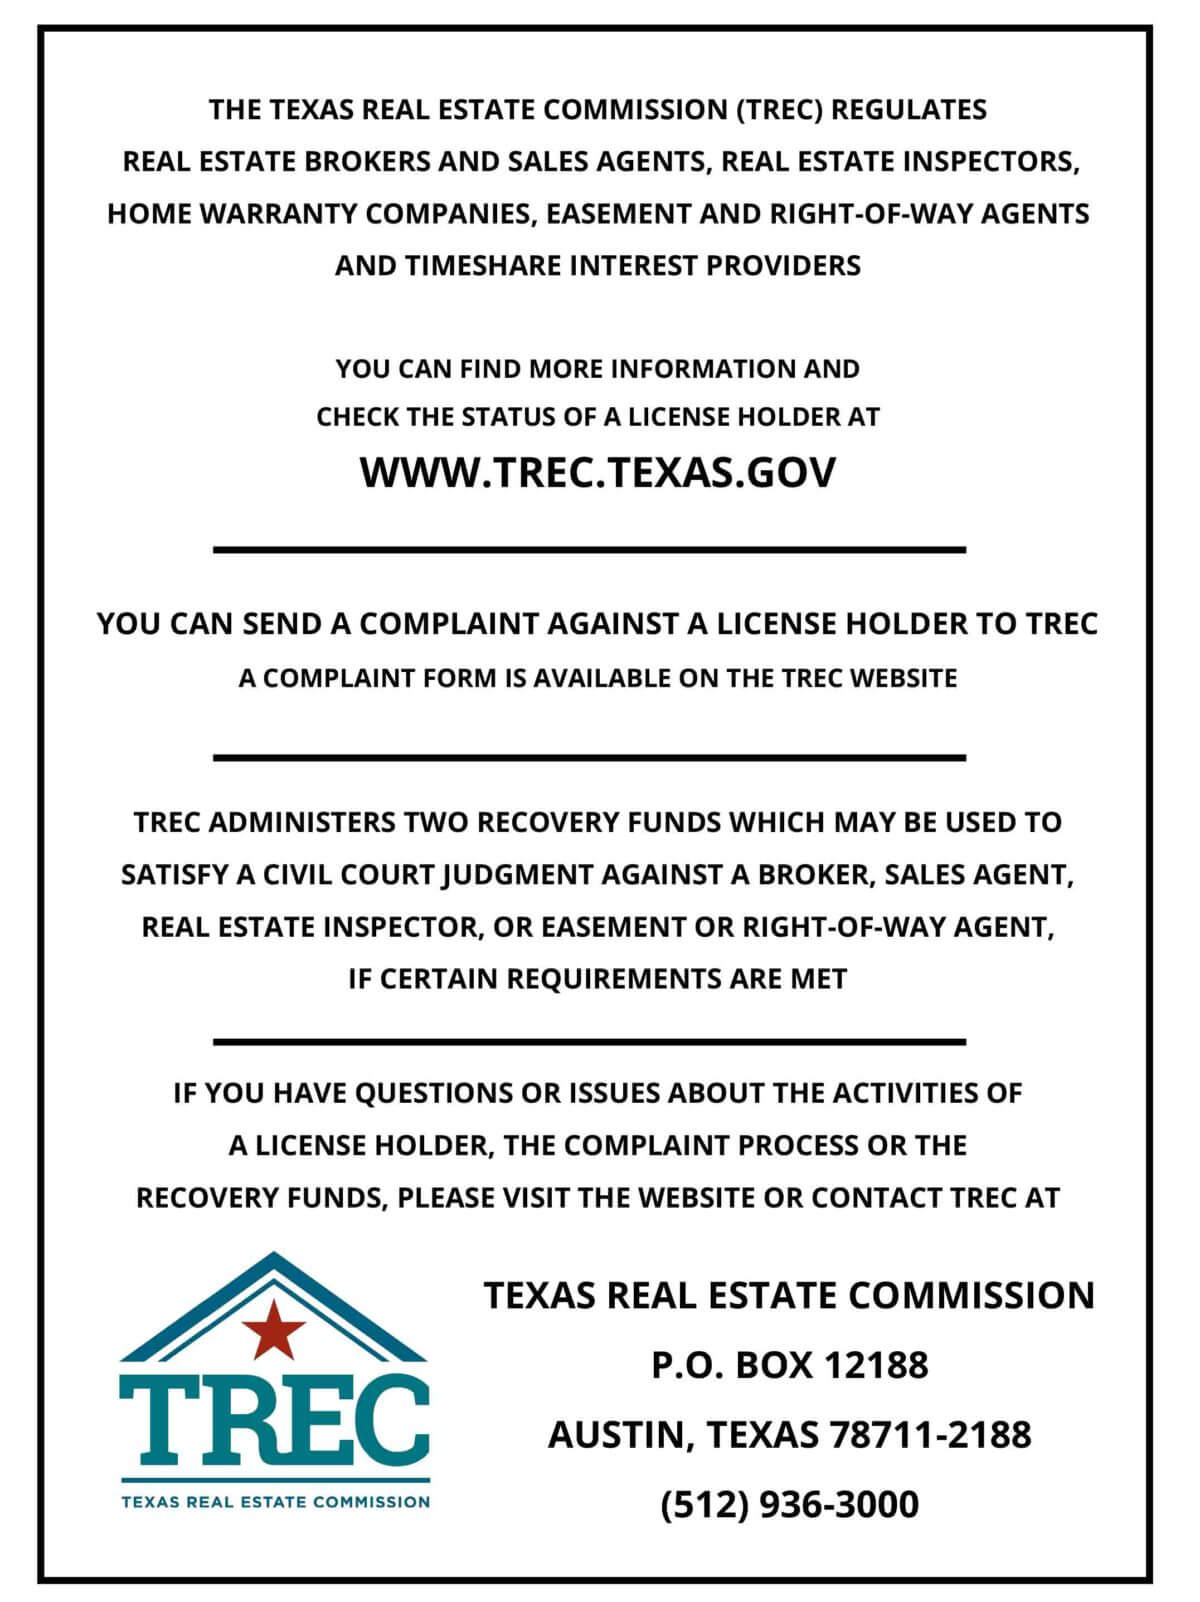 image of TREC Required Legal Information about Brokerage Services